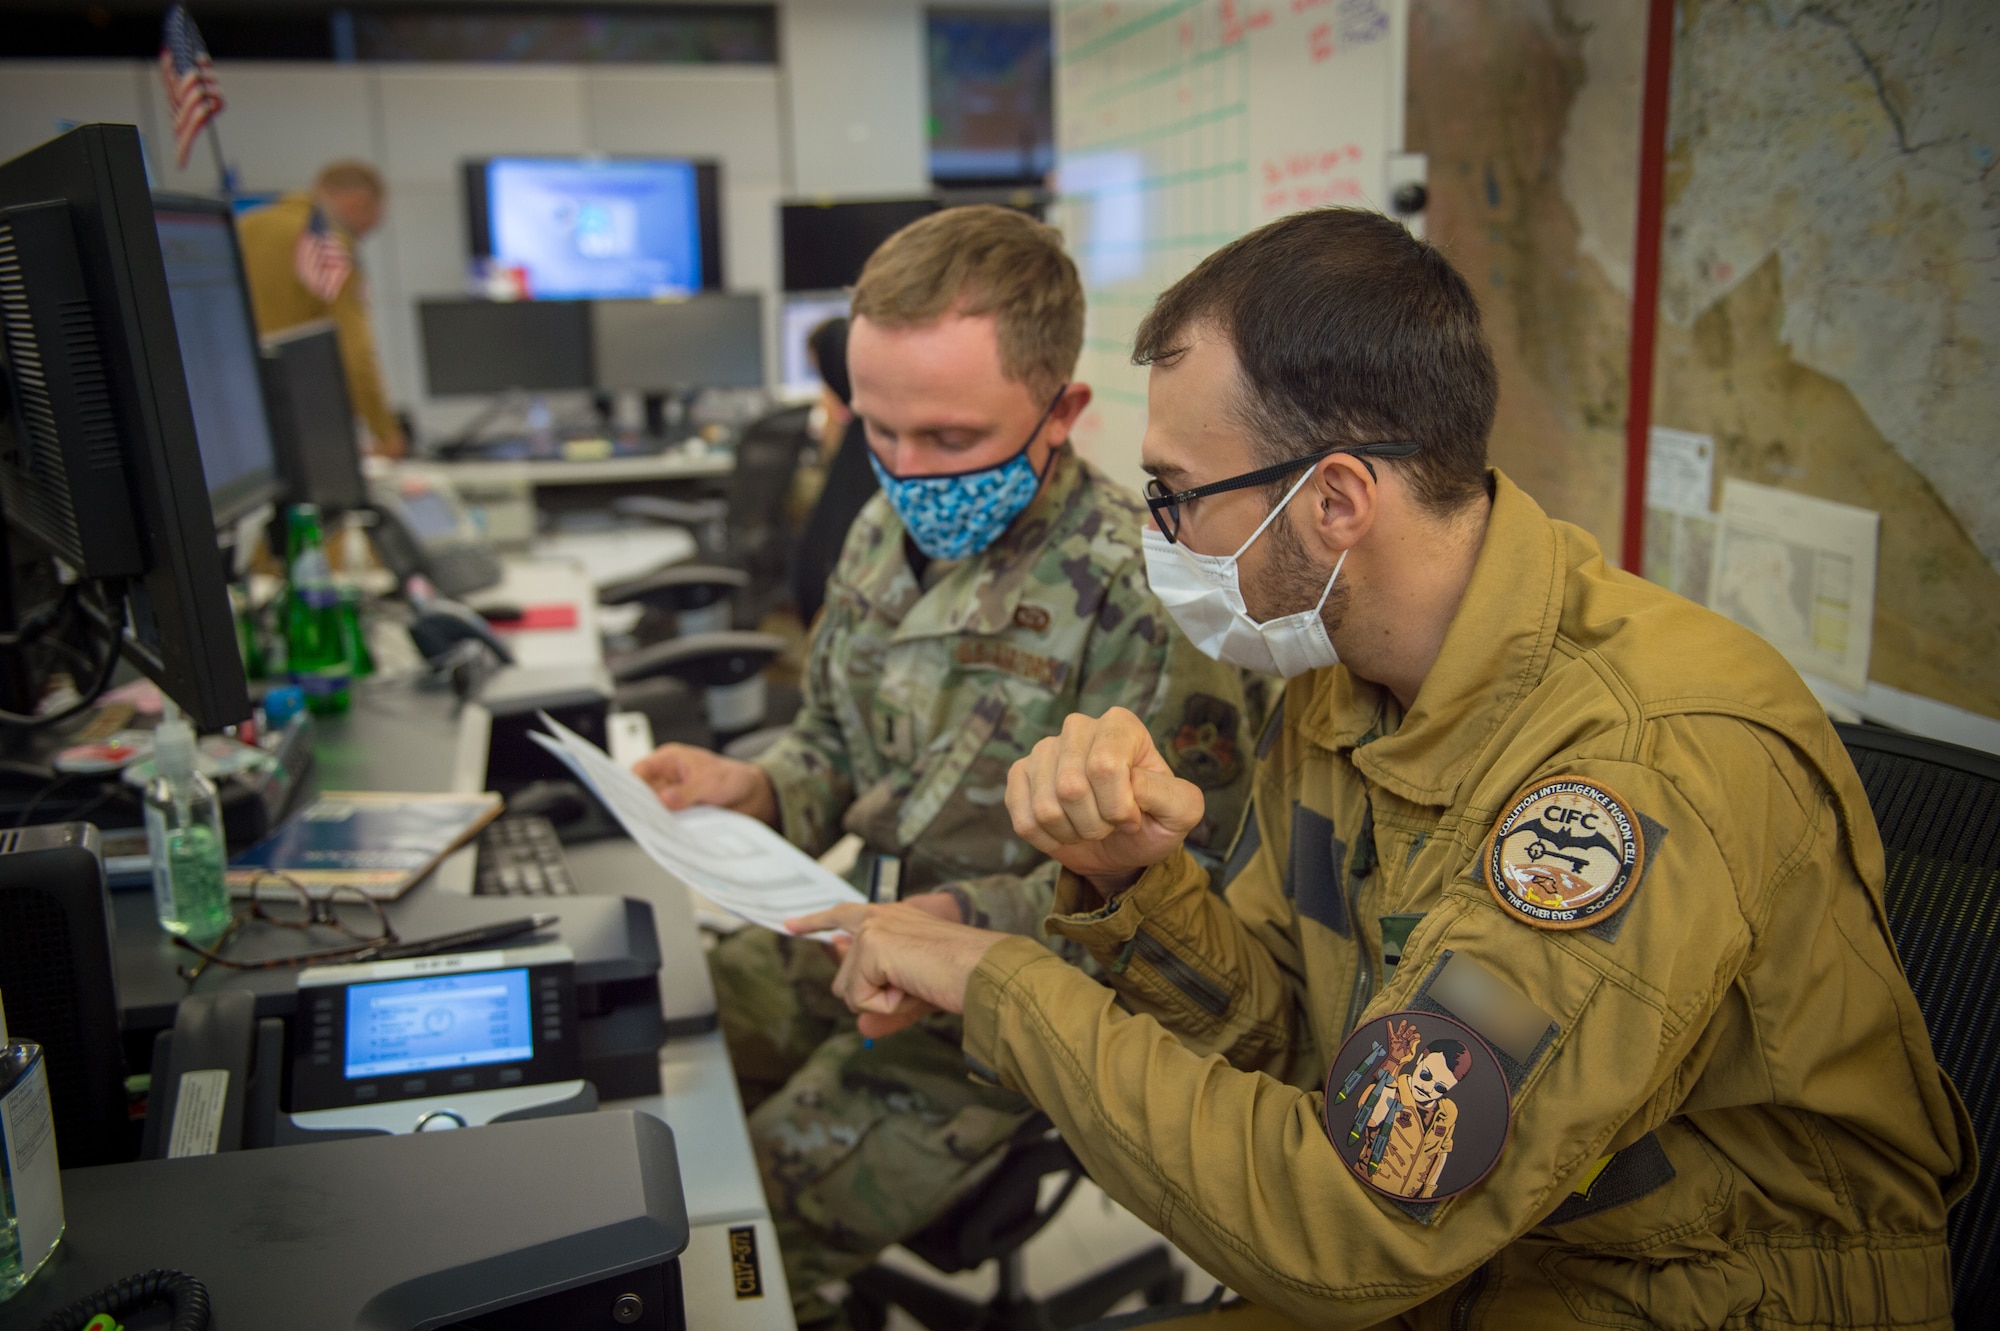 U.S. Air Force 2nd Lt. Kyle Hefner and French Naval Lt. j.g, Octave, targeeteers assigned to the Coalition Intelligence Fusion Cell, 609th Air Operations Center, U.S. Air Forces Central Command, Al Udeid Air Base, Qatar, collaborate daily to provide intelligence support. Targeeters are specially trained to analyze a target and develop solutions to support the commander’s objectives